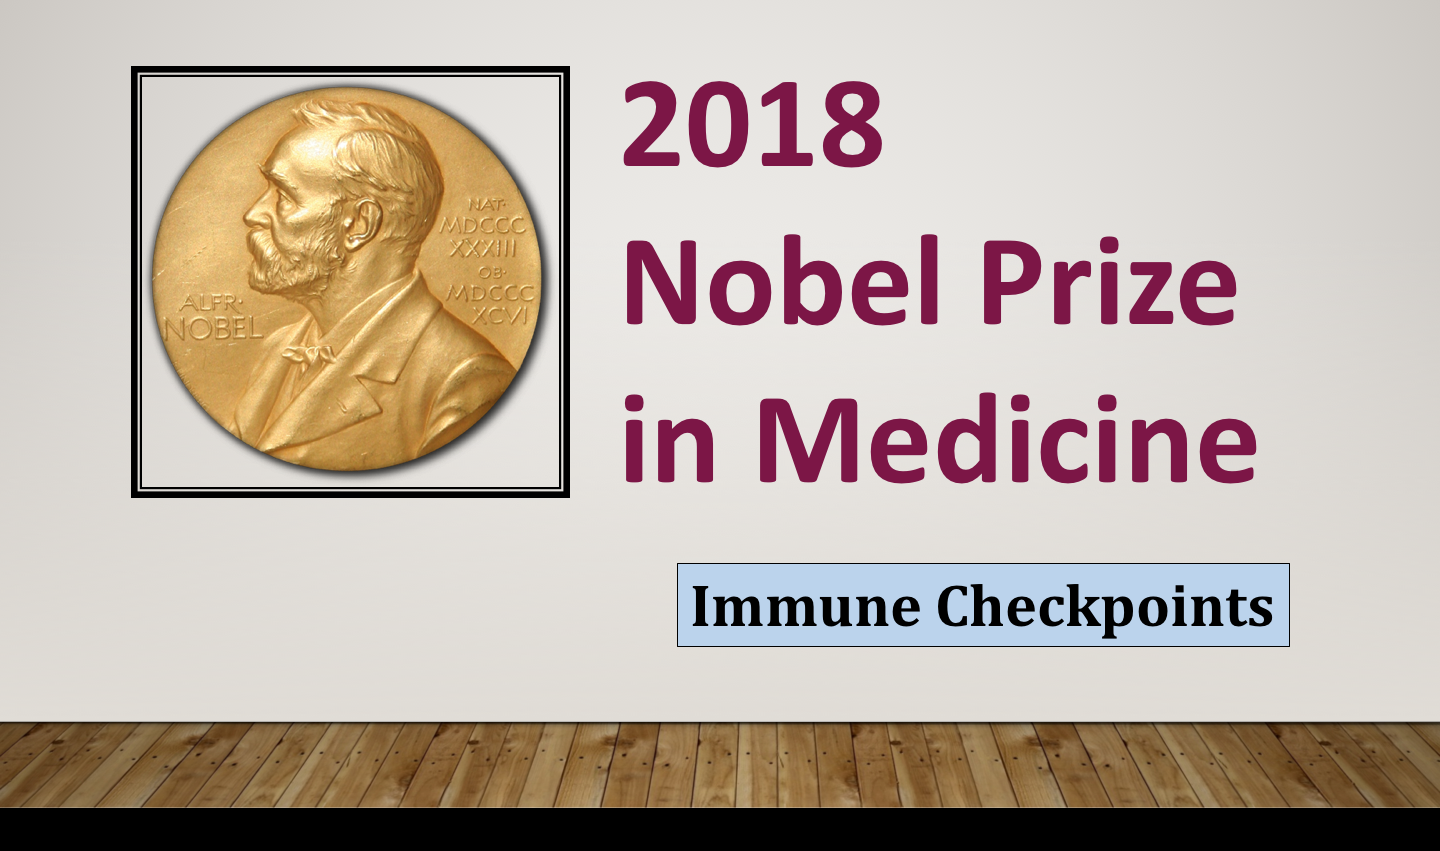 Nobel Prize in Medicine and the treatment of small cell lung cancer